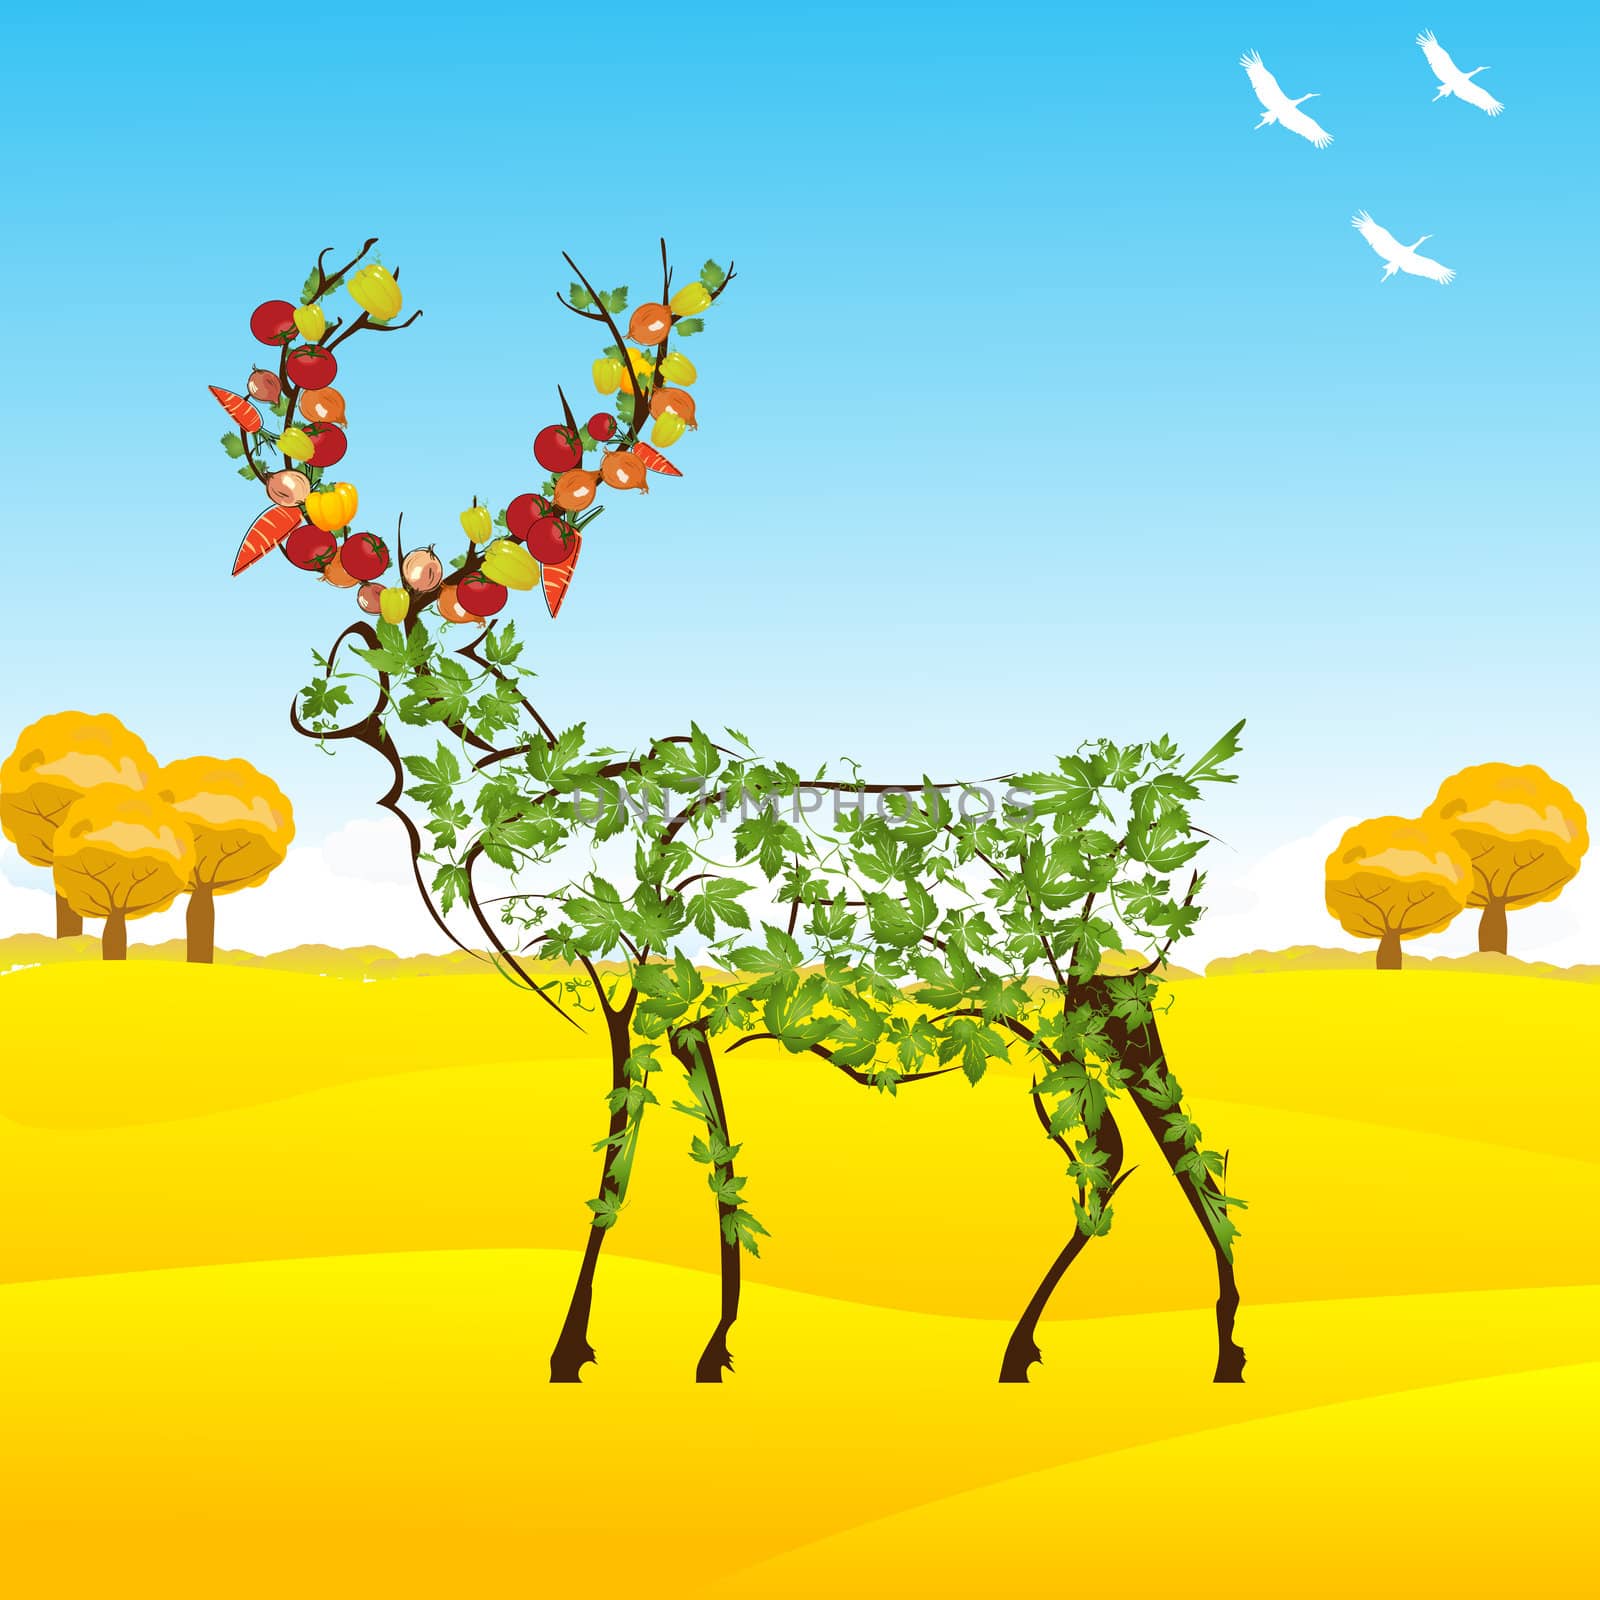 Conceptual autumn illustration with a stylized deer with leaves and vegetables between horns